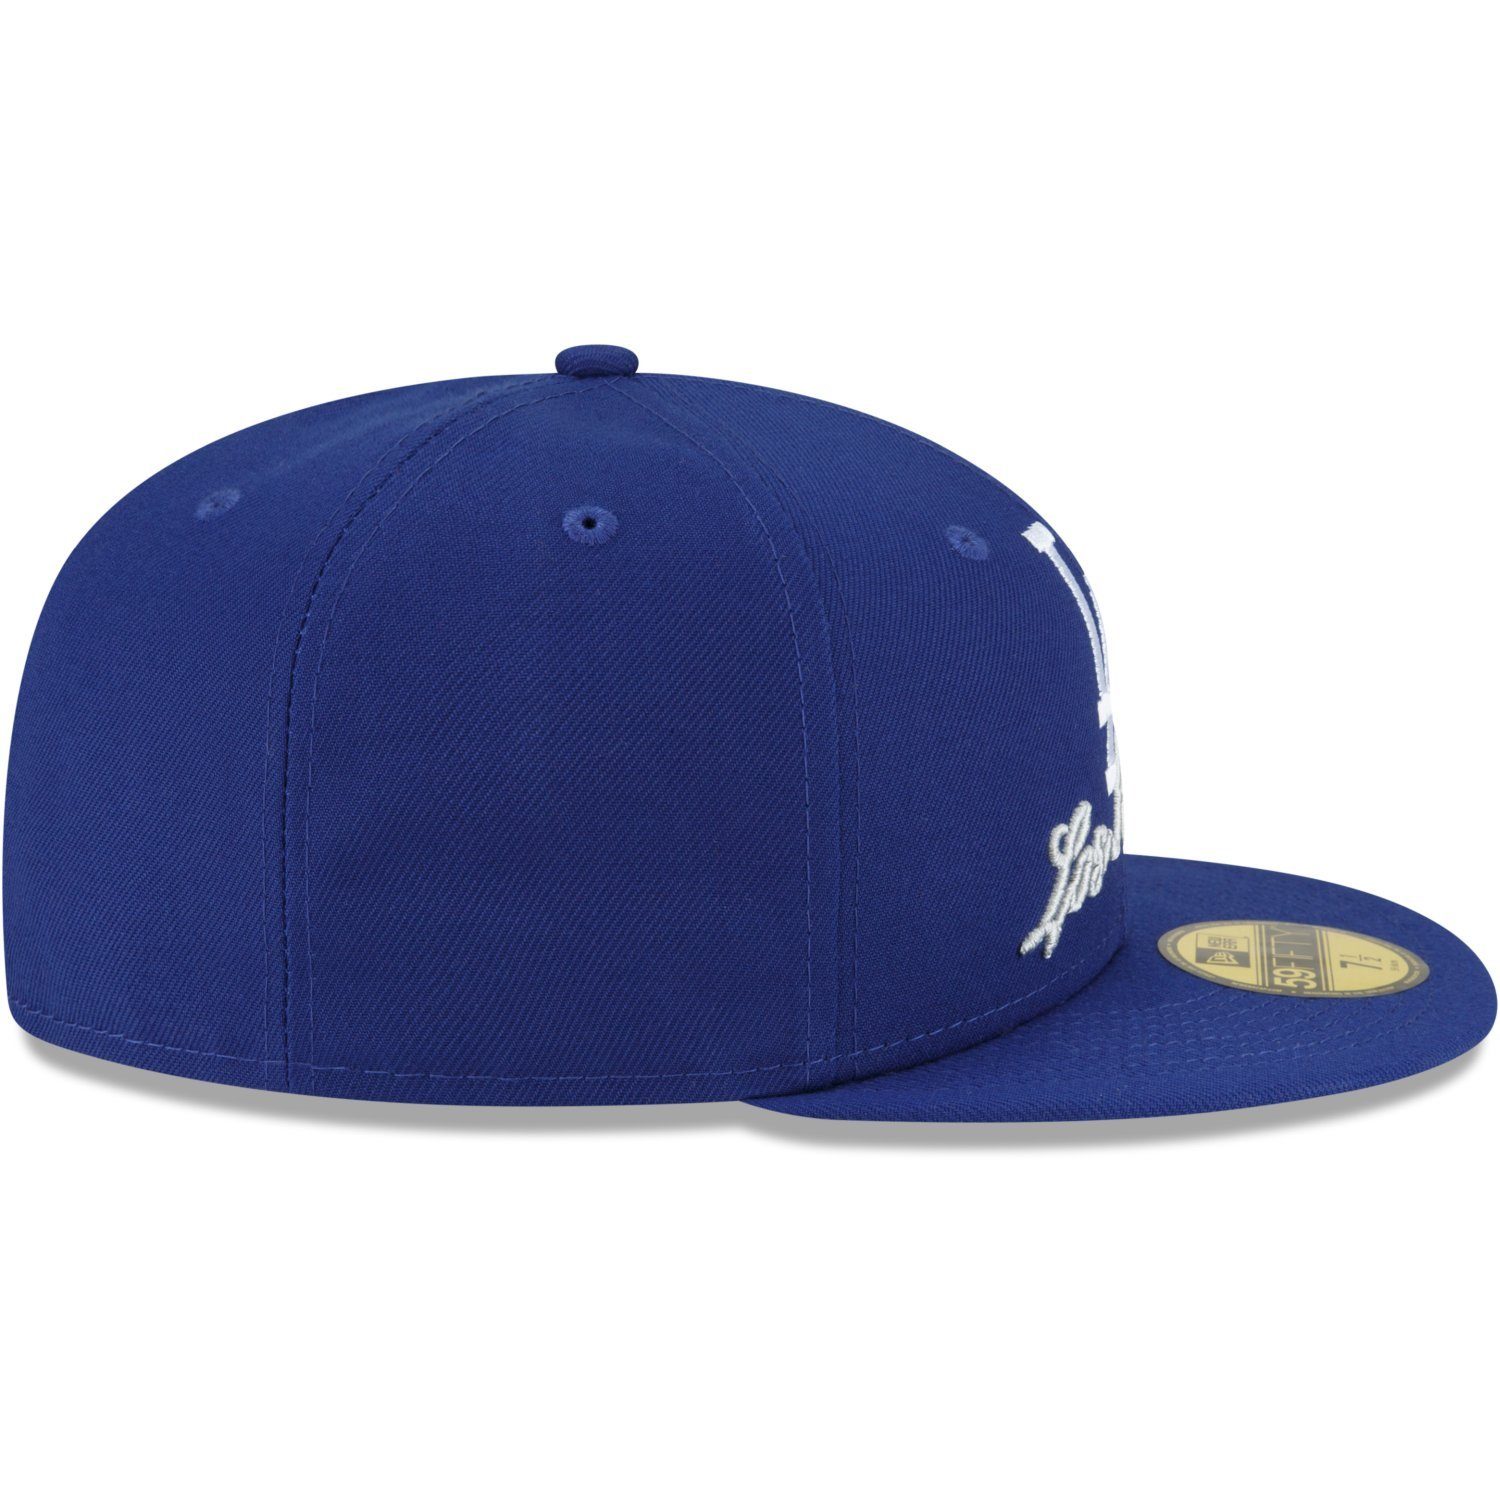 Angeles Era Los Cap Fitted Dodgers New DUAL LOGO 59Fifty